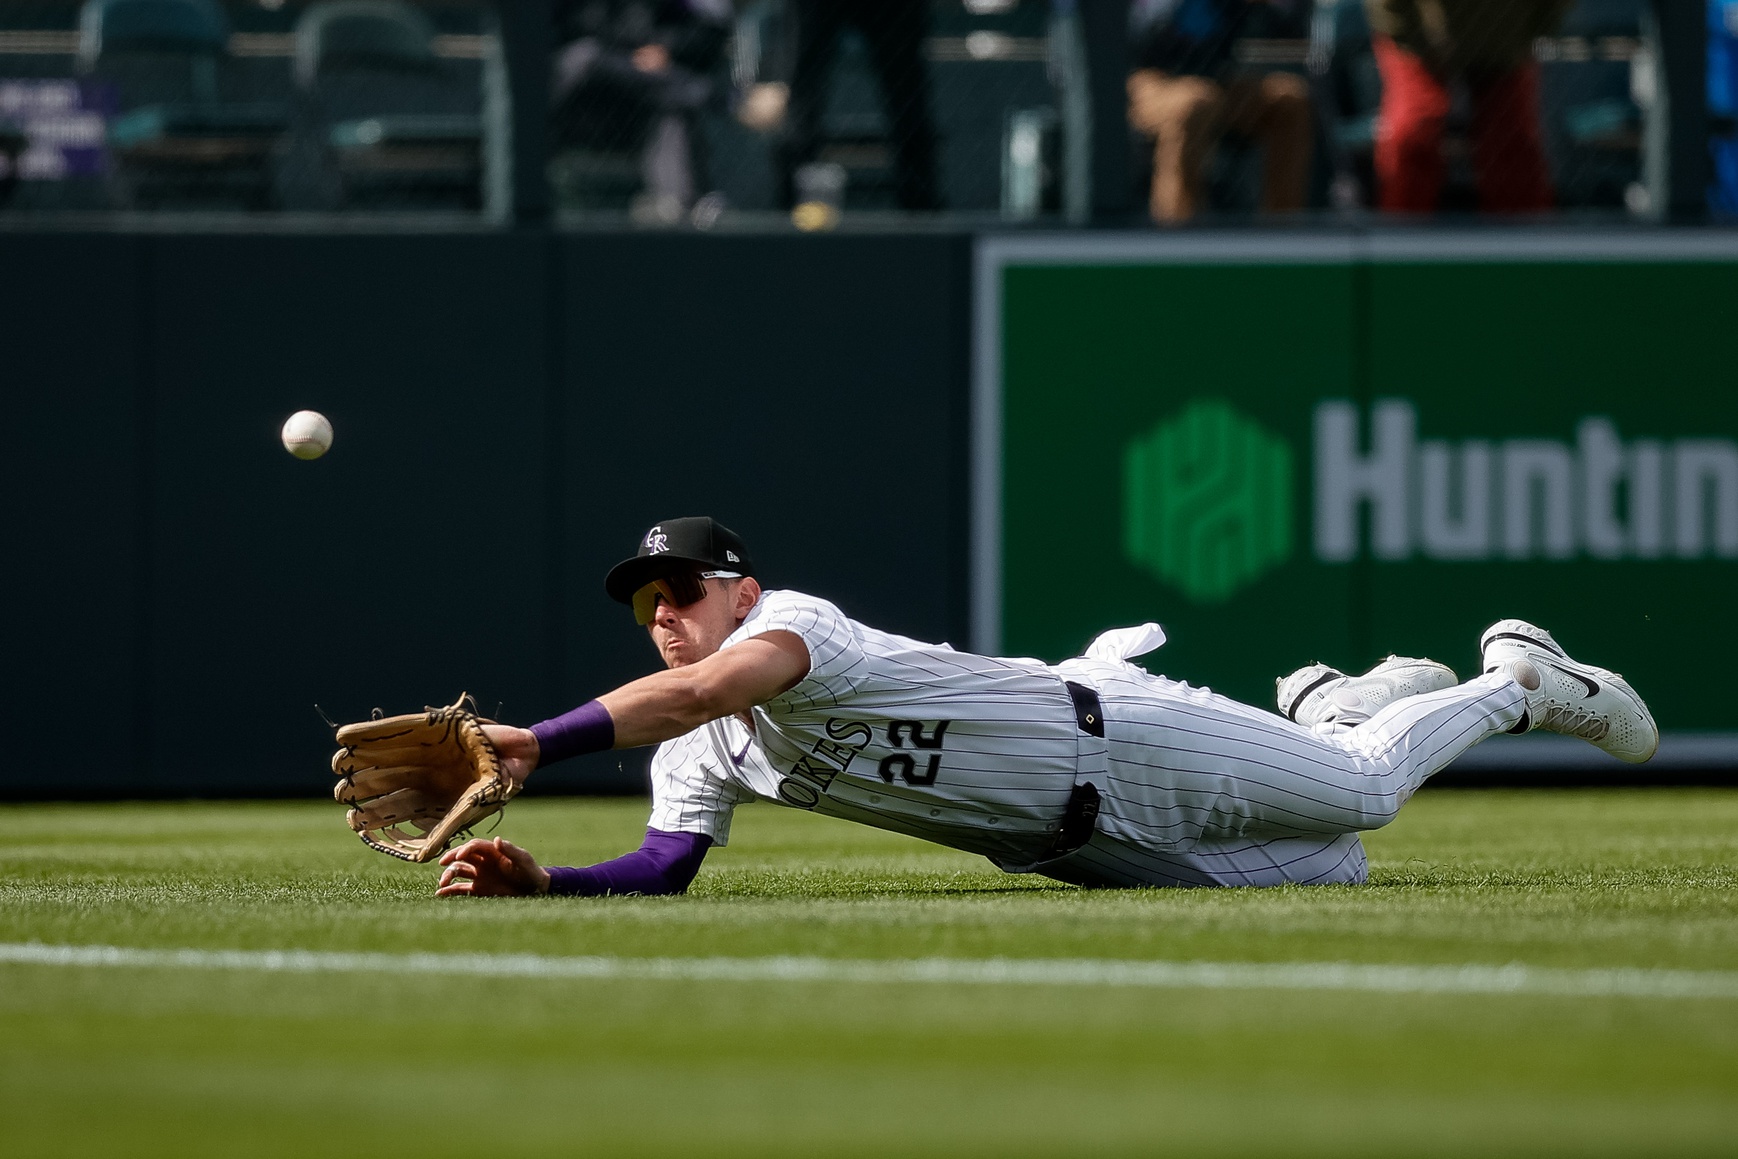 Rockies Outfielder to Miss Time Due to Back Stiffness